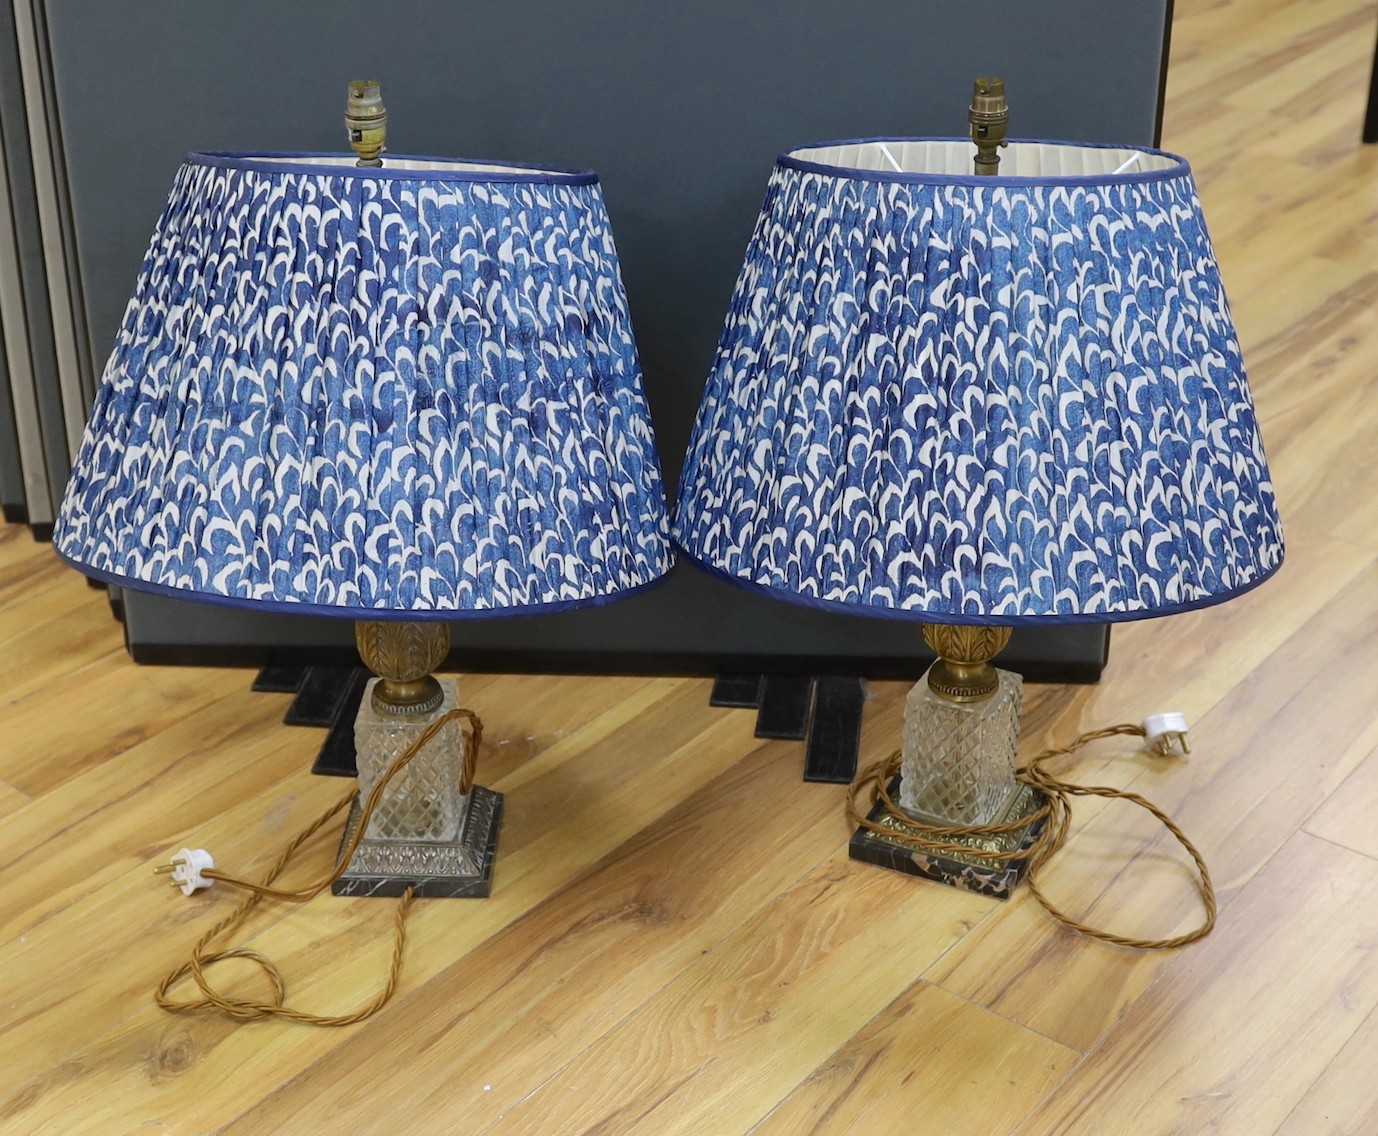 A pair of gilt brass and glass lamps with shades, 71cms high including light fitting                                                                                                                                        